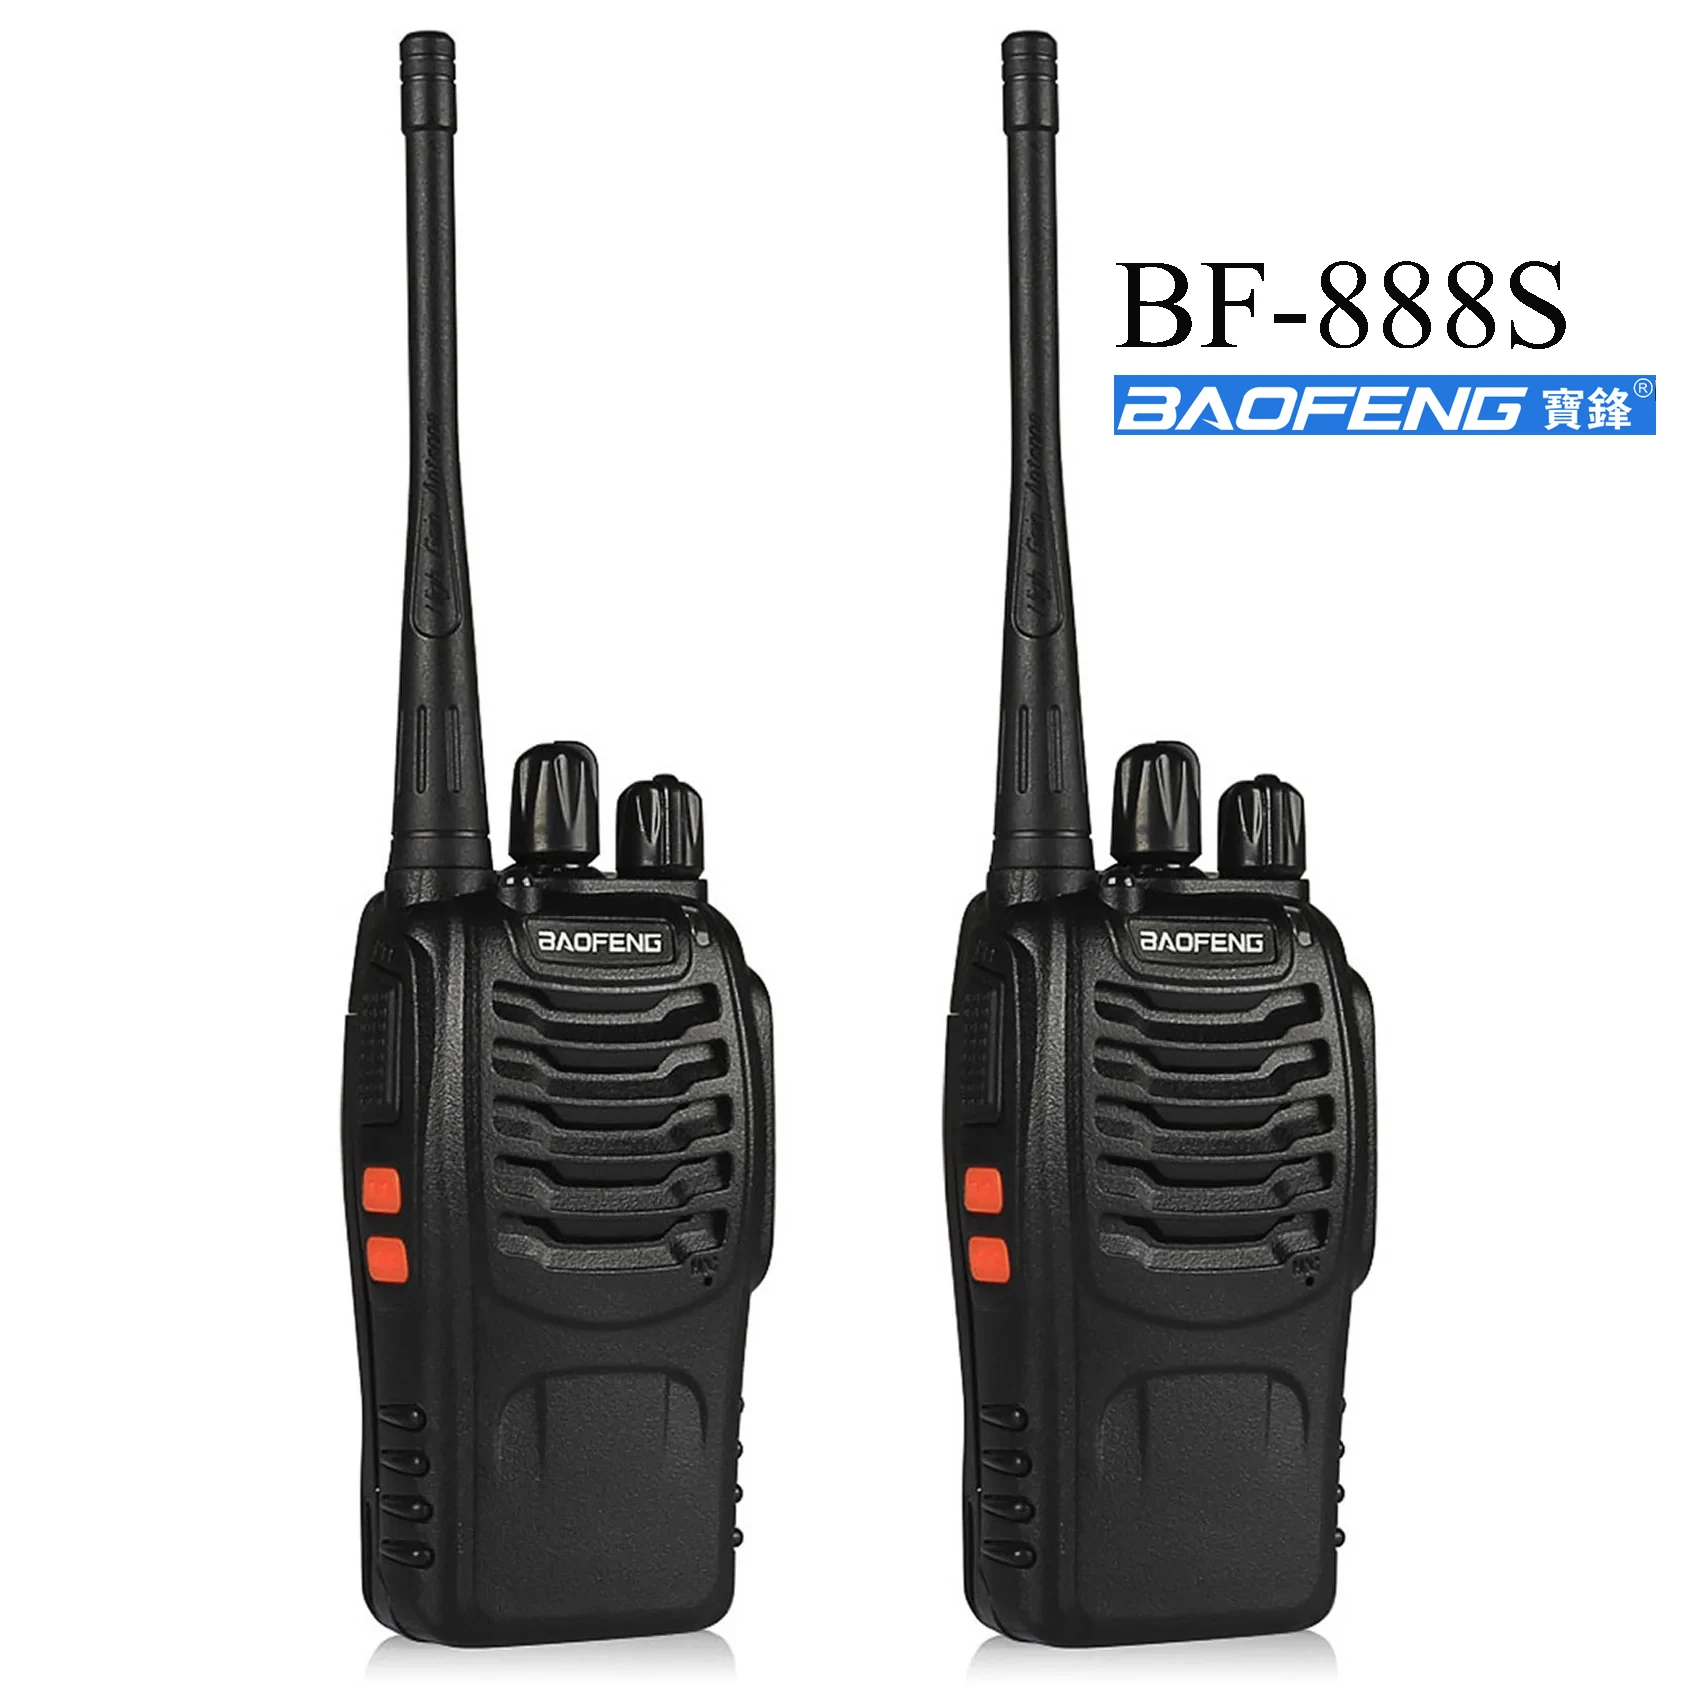 

1pcs and 2pcs Baofeng BF-888S walkie talkie 888s UHF 400-470MHz Channel Portable two way radio bf-888s 16 communication channels